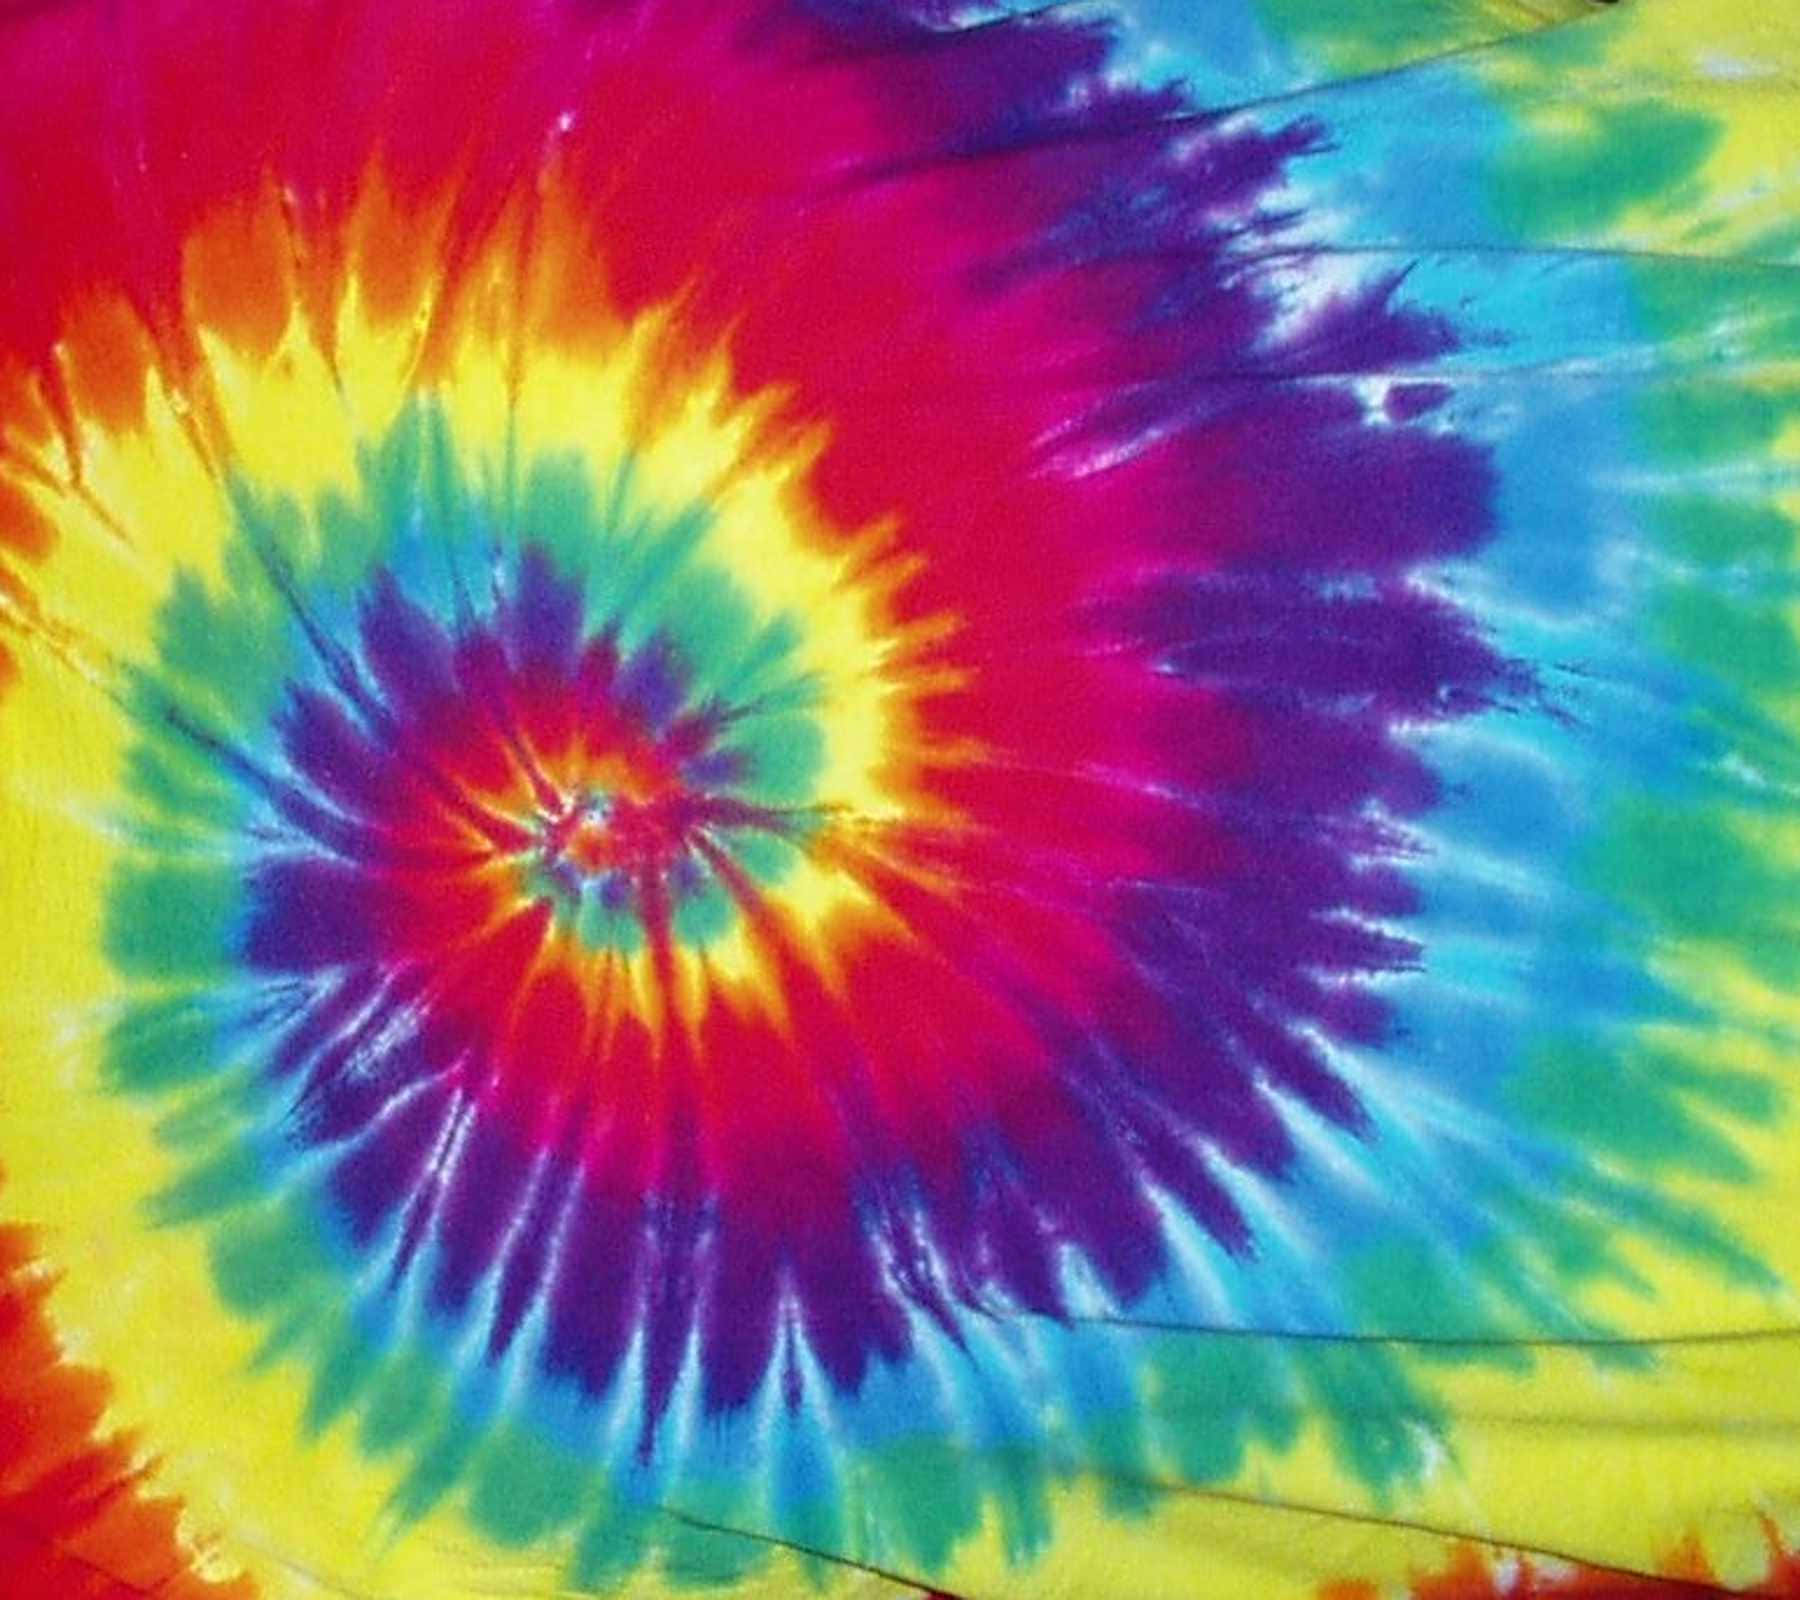 Take Your Outfit to the Next Level with Vibrant Tie Dye